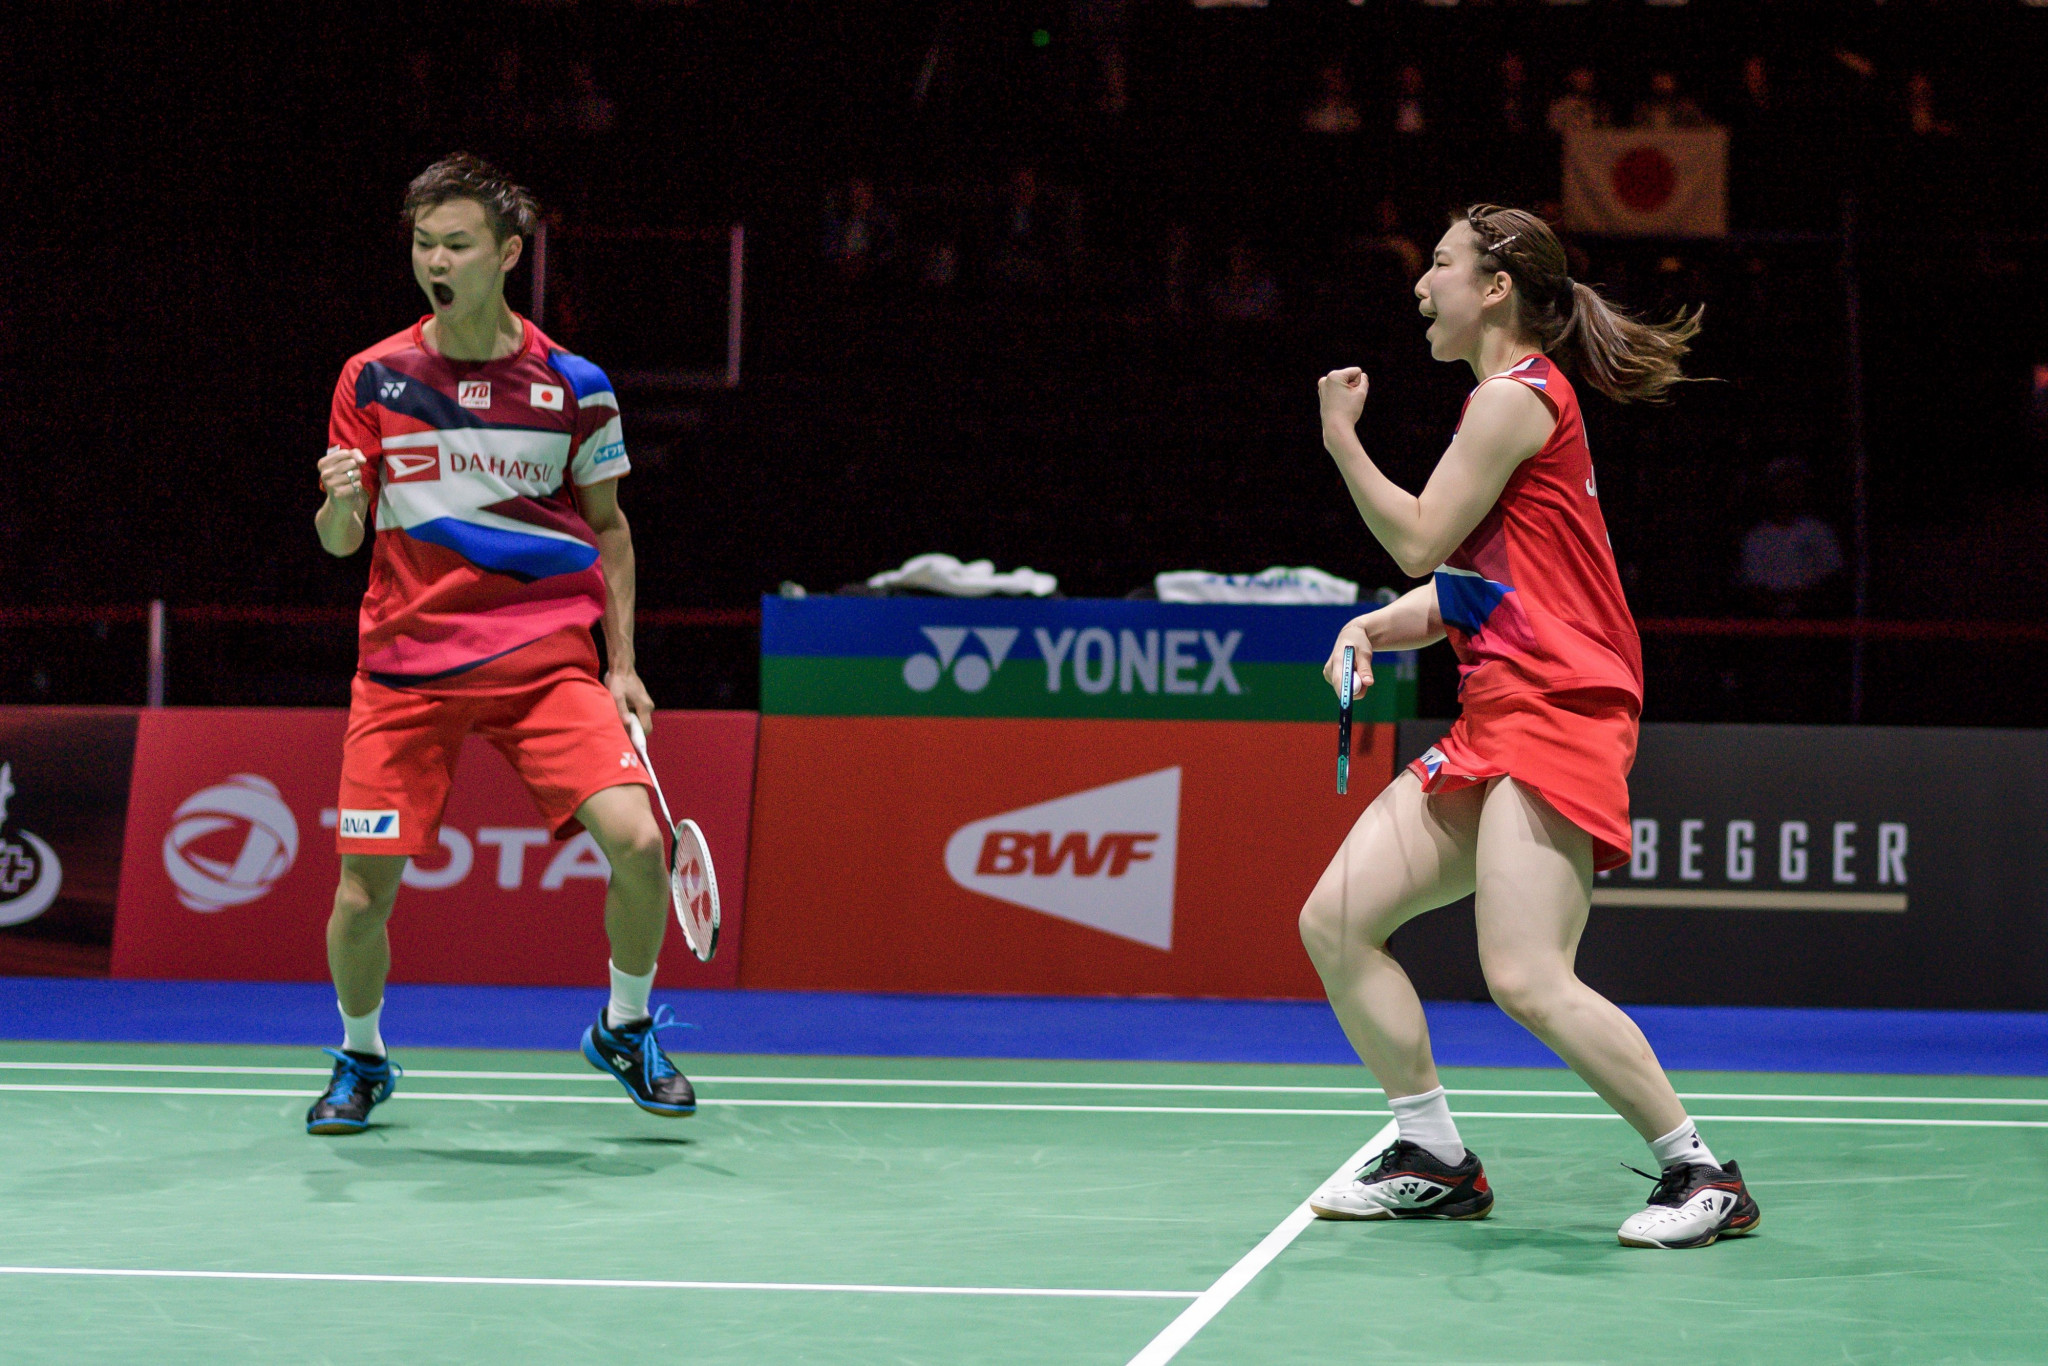 Mixed doubles top seeds reach second round at BWF Korea Open